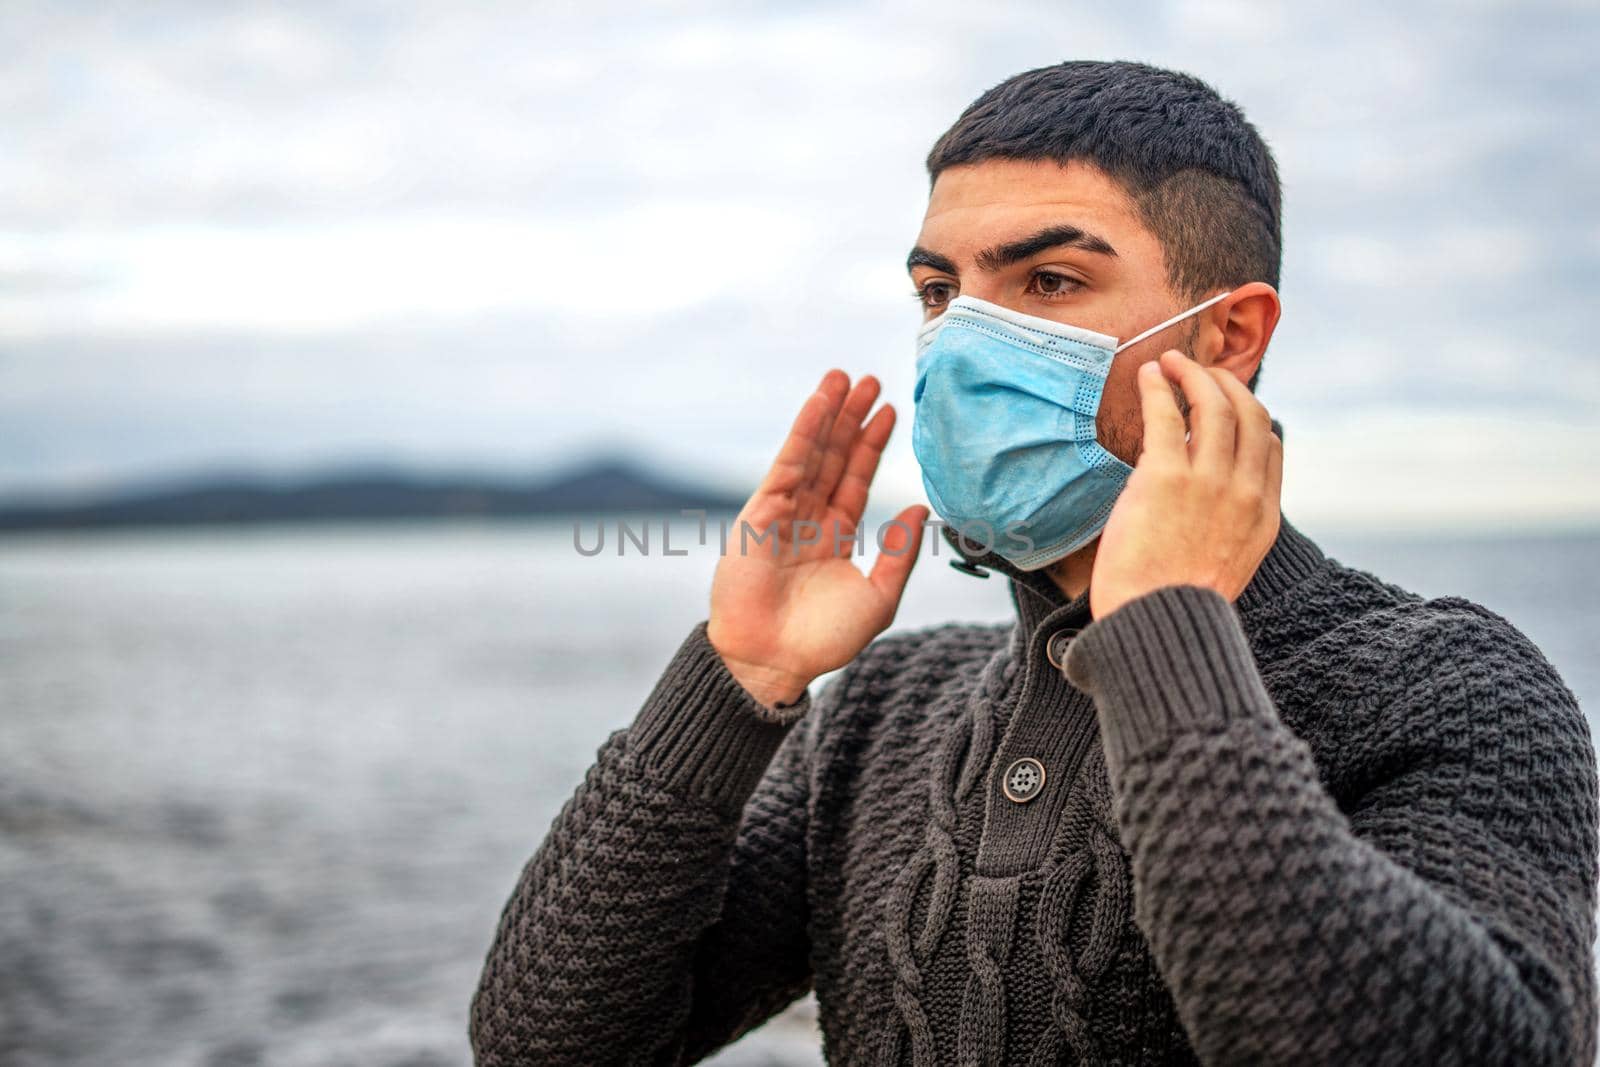 Handsome guy in dark wool sweater outdoor in sea resort has just worn face medical protection mask against Coronavirus pandemic virus - Young man living winter vacation with Covid-19 social disease